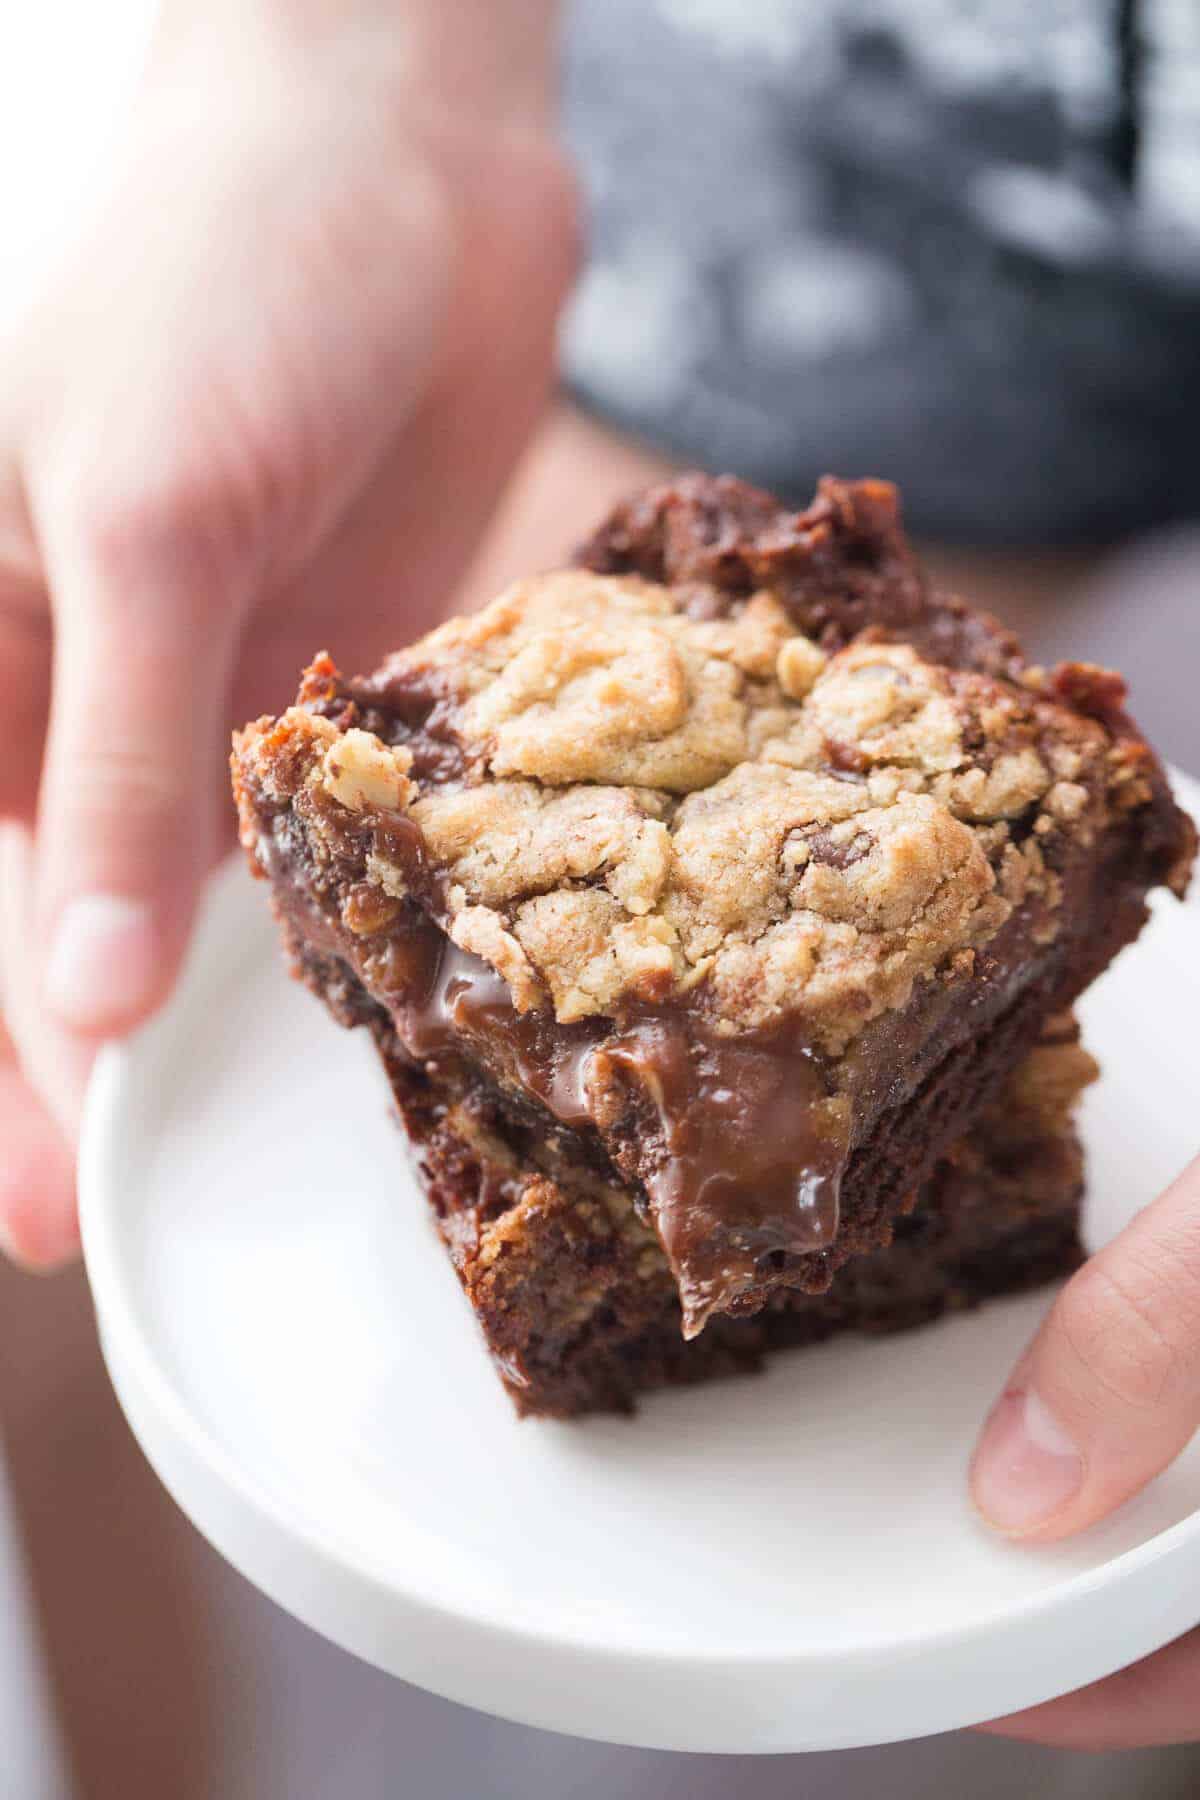 These Brookie bars have chocolate brownie base, a chocolate chip cookie top and a smooth chocolate caramel layer in the center!